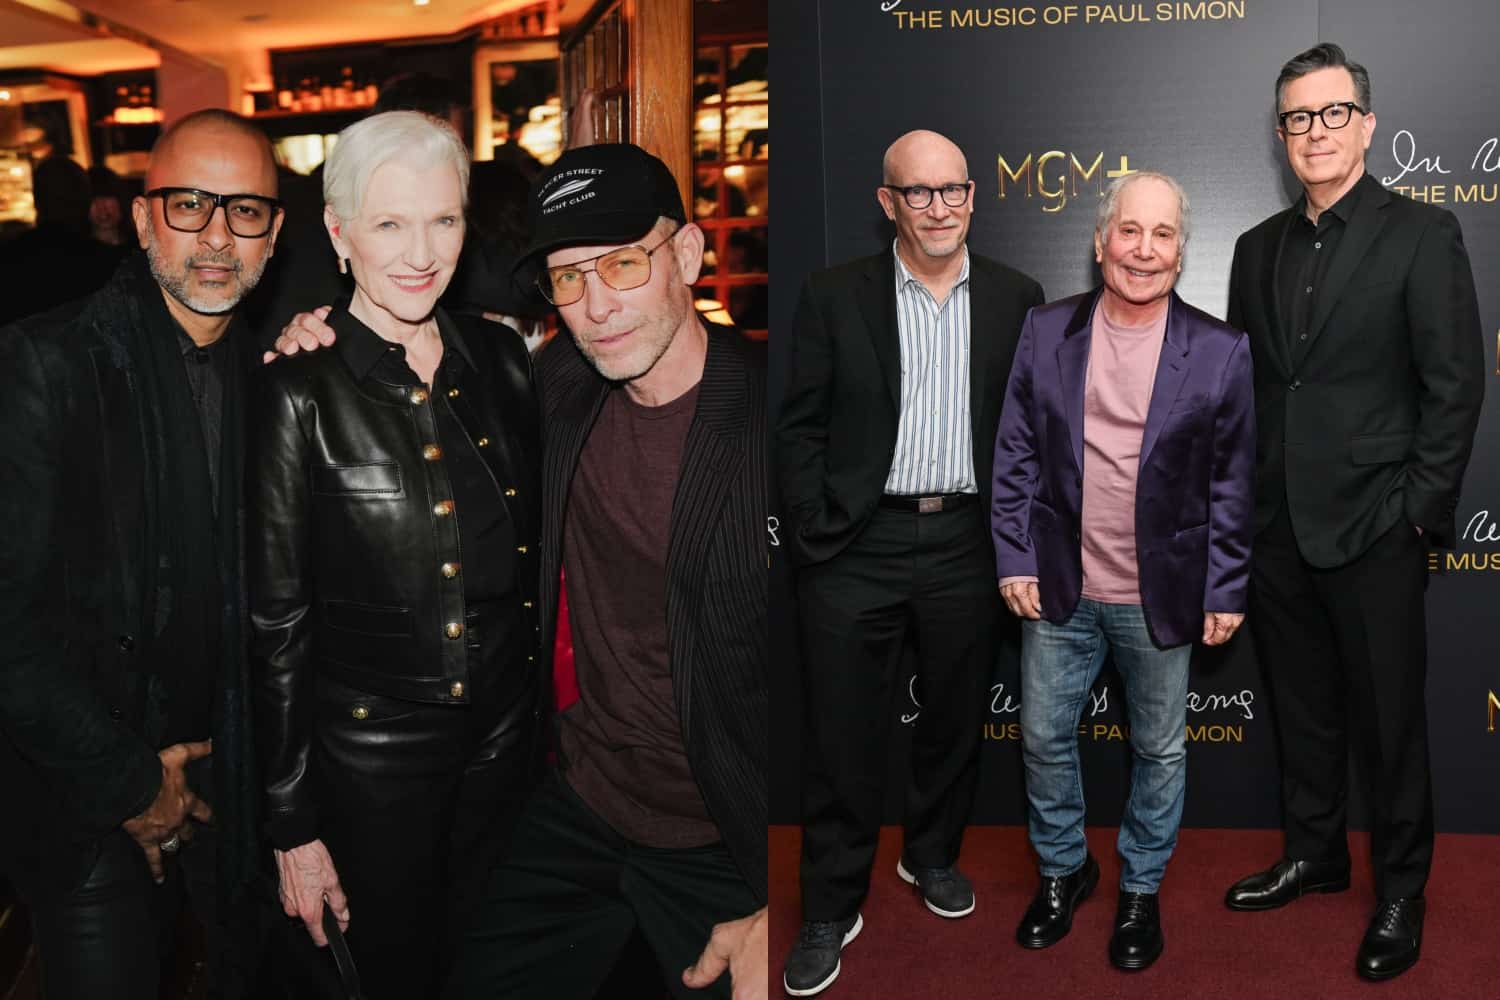 Lure Fishbar Celebrates 20 Years, Stars Turn Out To Support Paul Simon